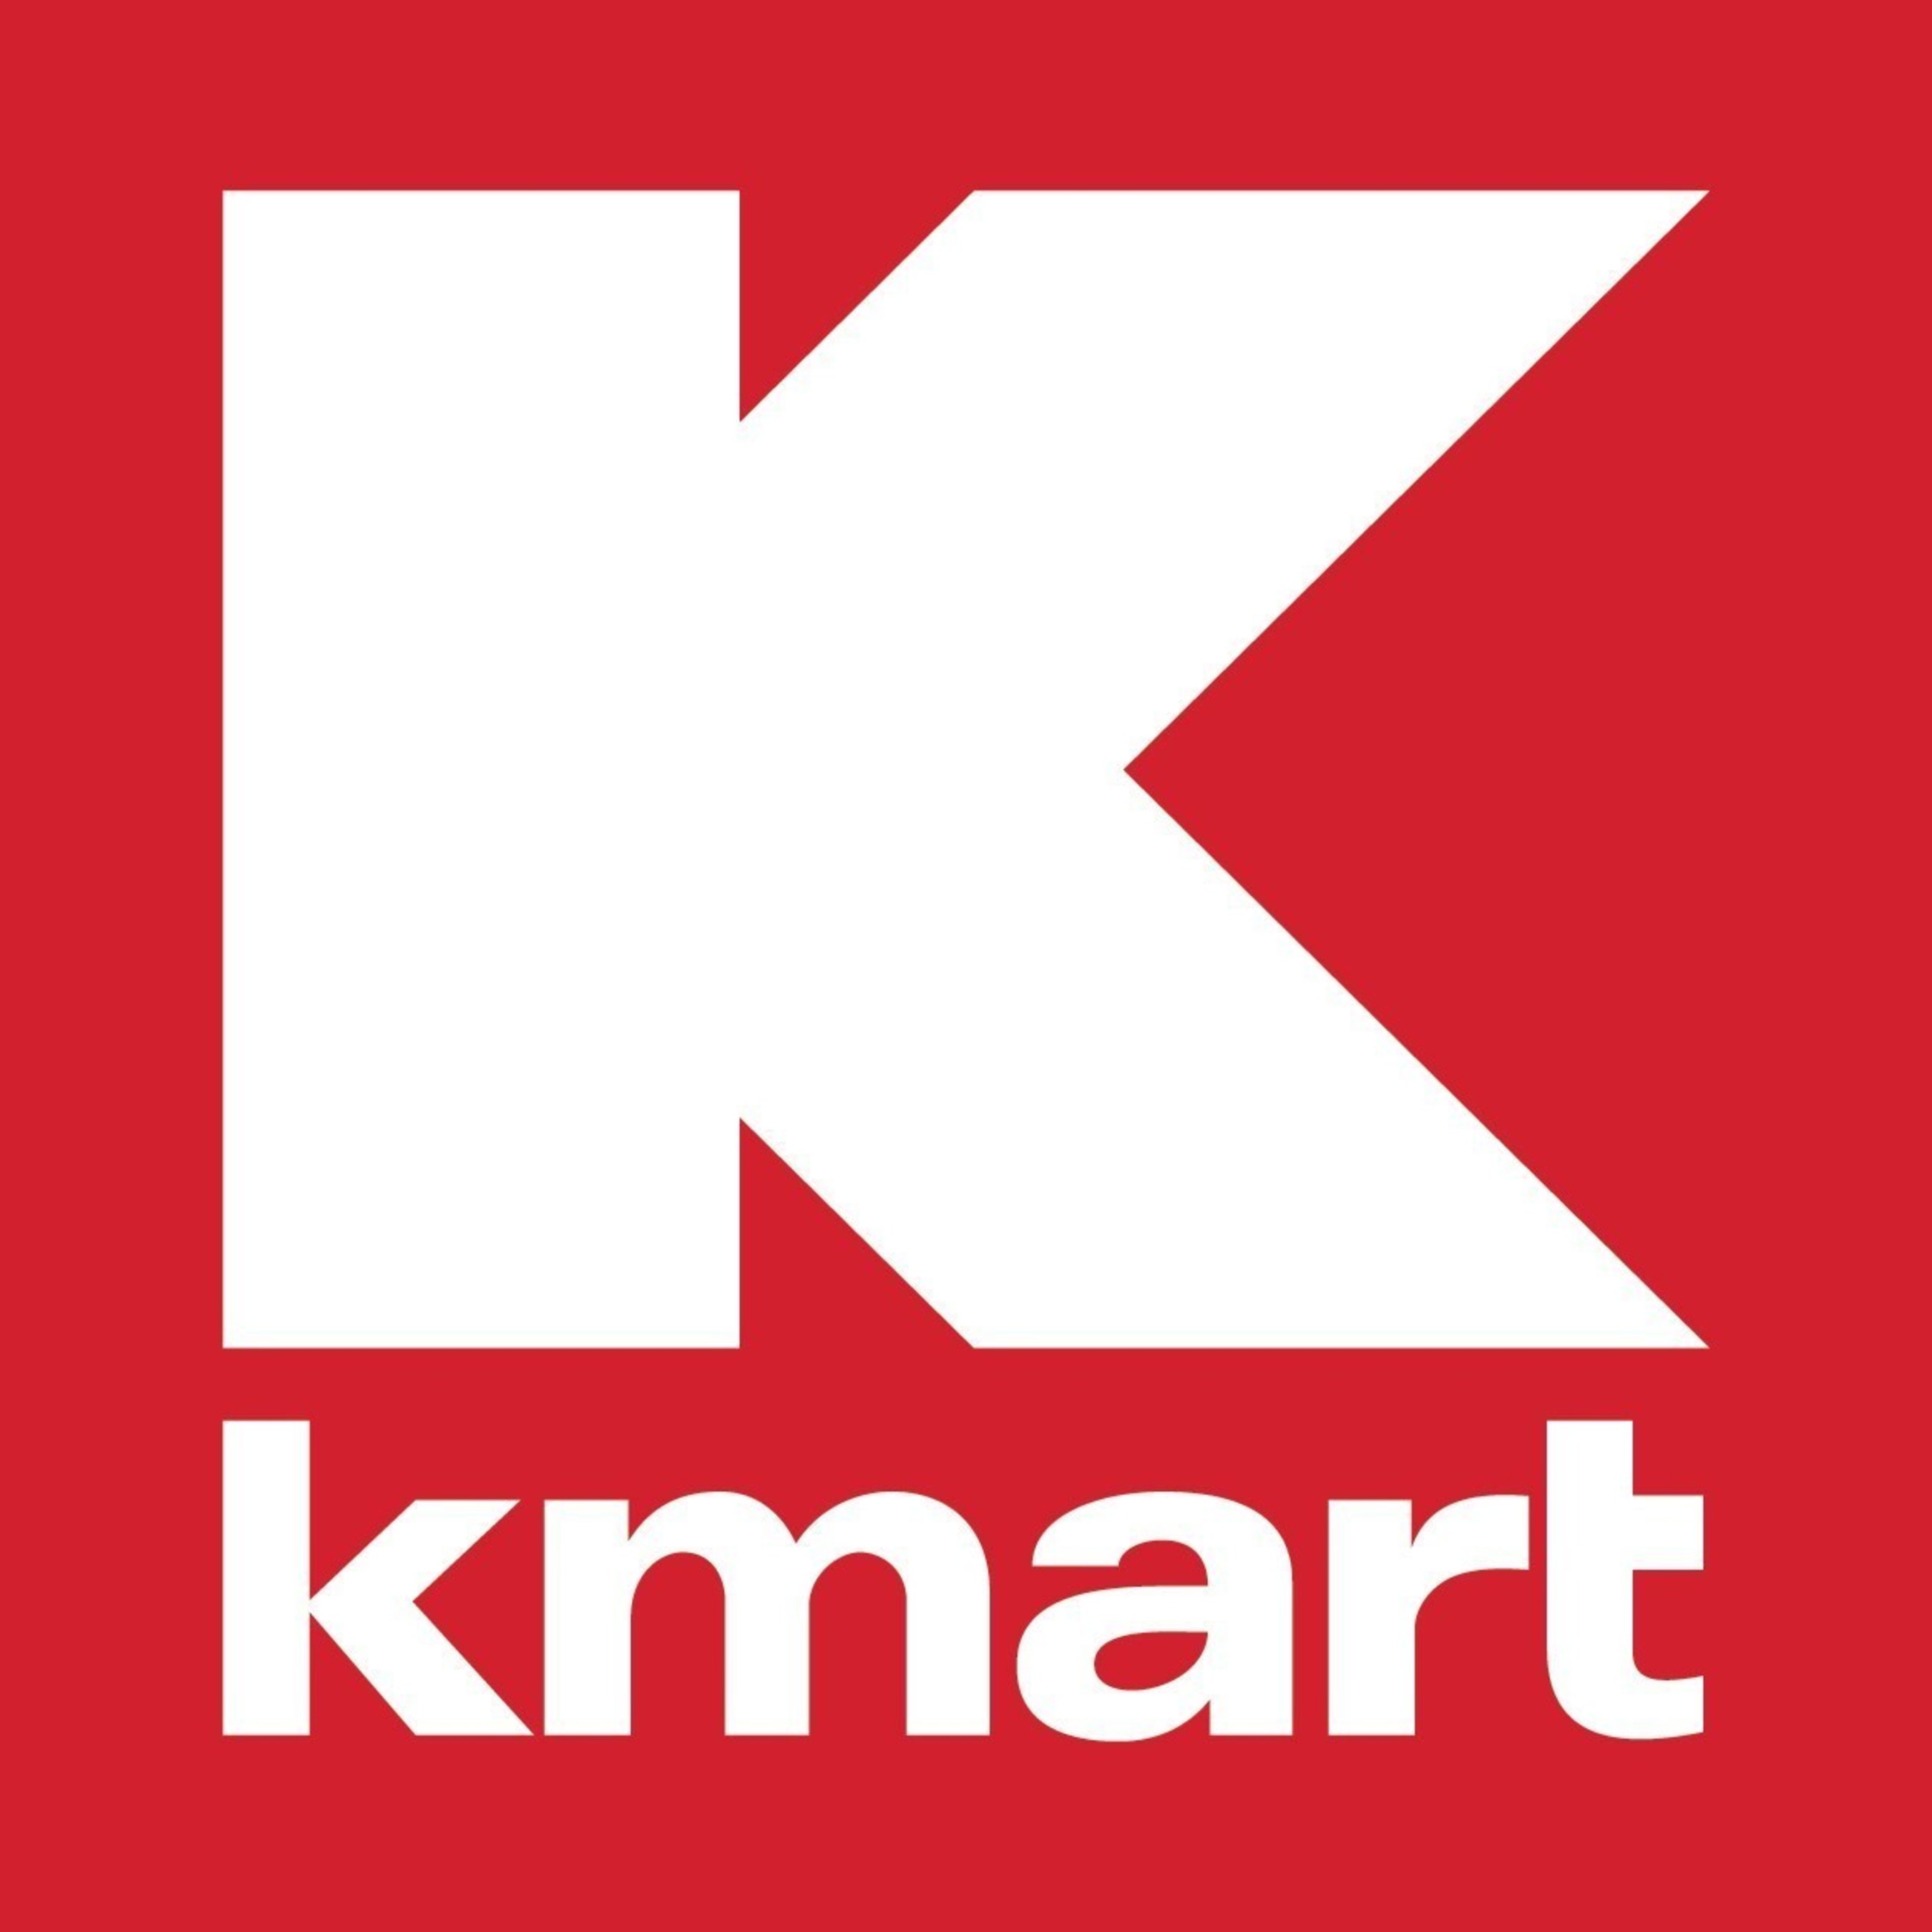 Kmart Australia - At Kmart, we take the quality and safety